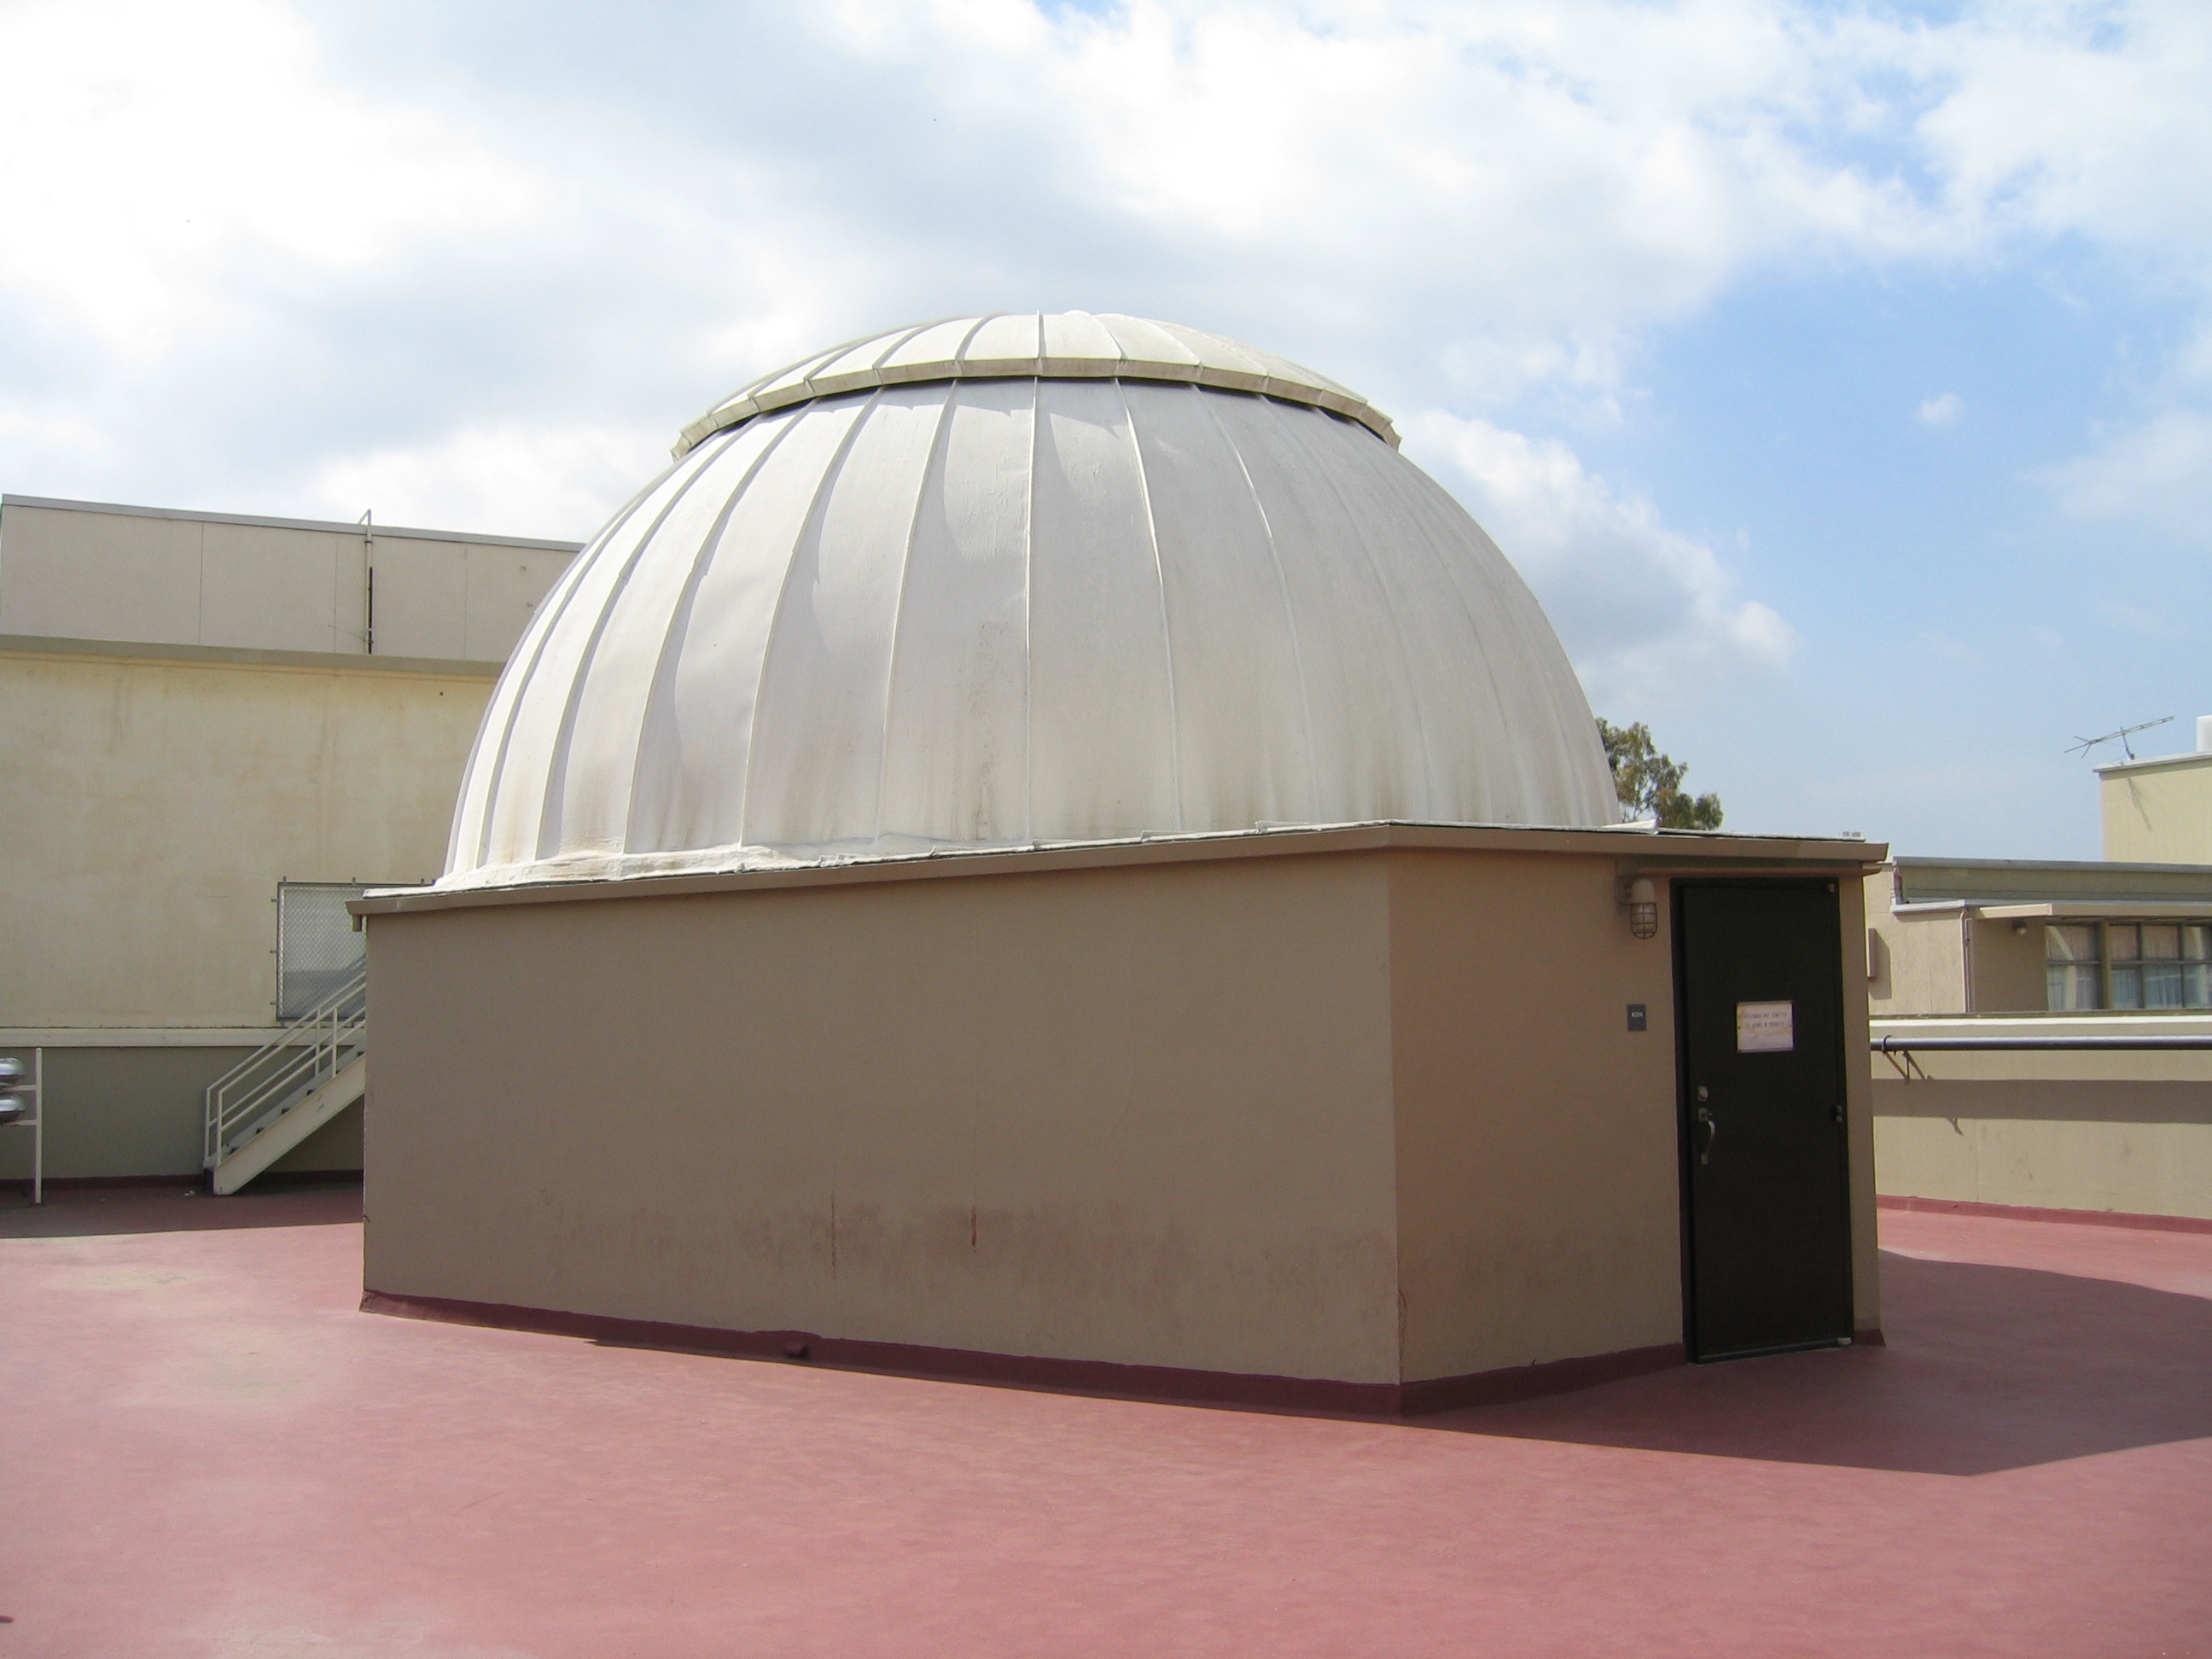 The UCLA Planetarium, located on the 8th floor of the Mathematical Sciences Building